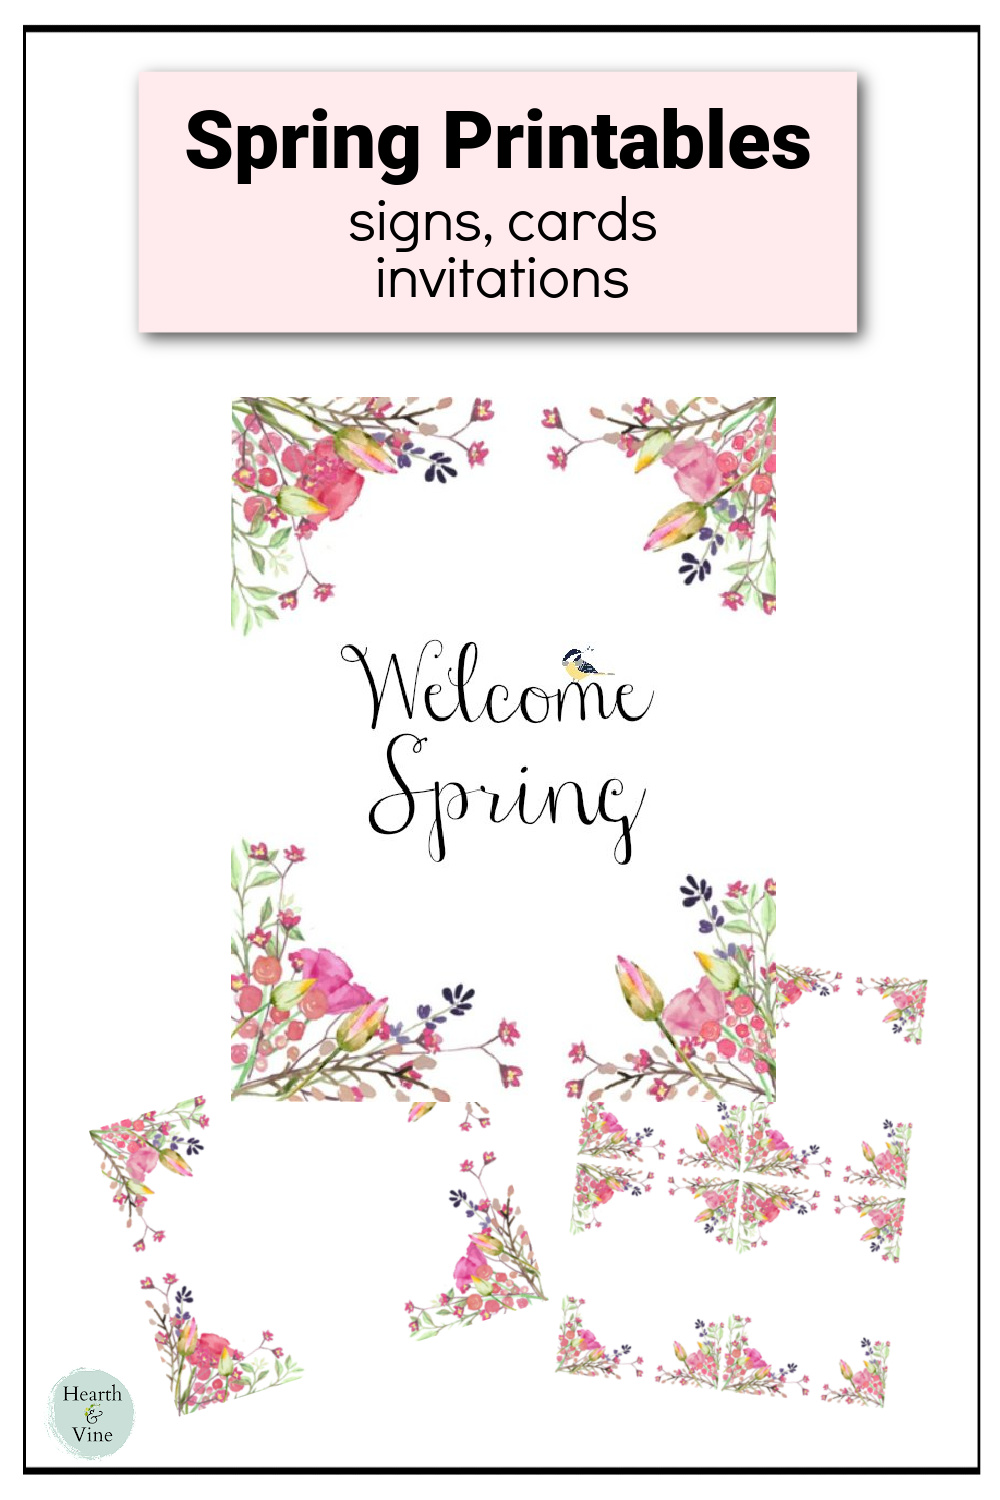 Spring floral prints including "welcome spring" and a few floral frames.